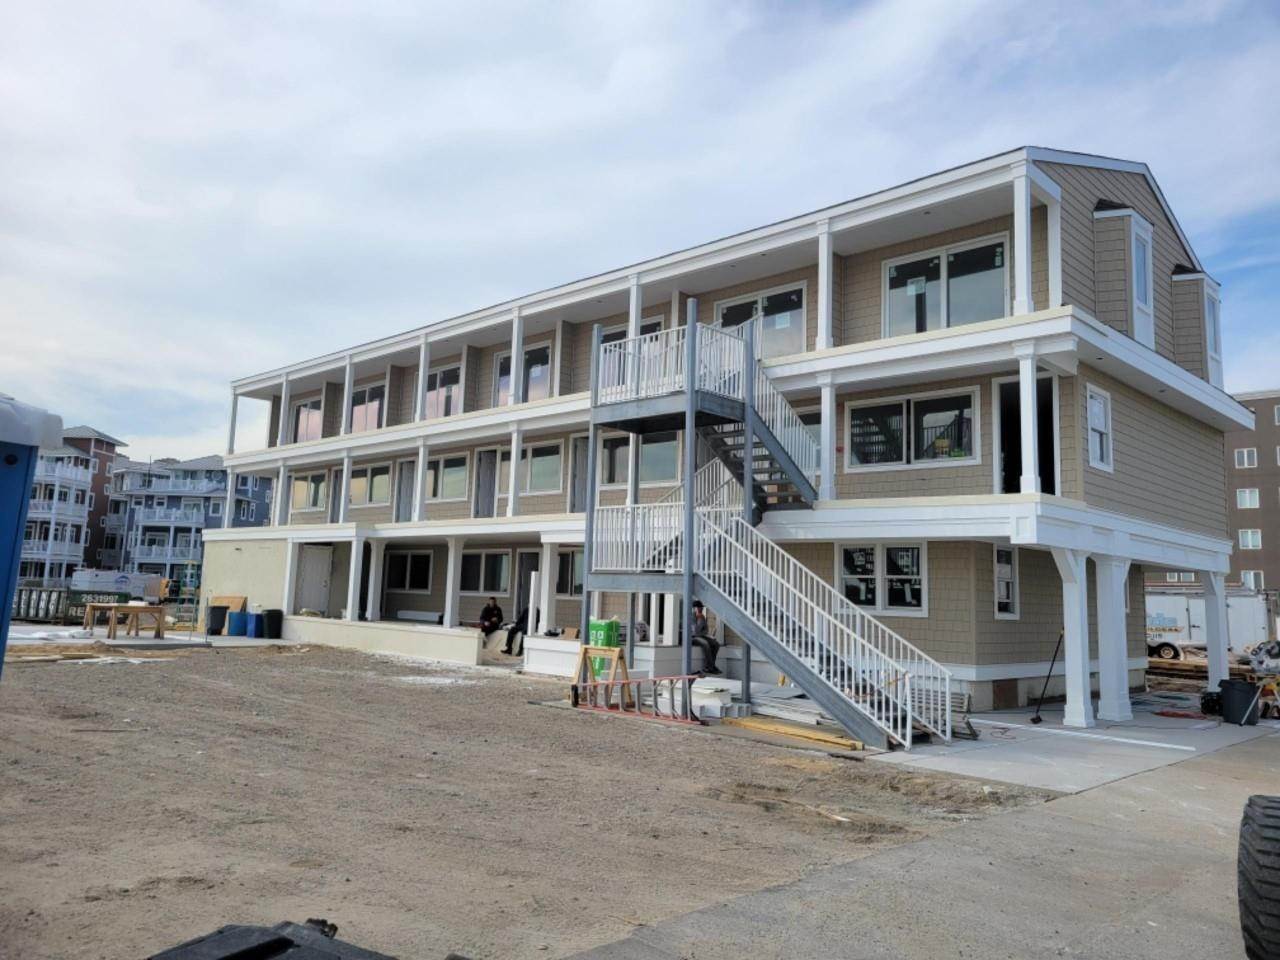 Condominiums for Sale at 422 E Farragut Road Wildwood Crest, New Jersey 08260 United States